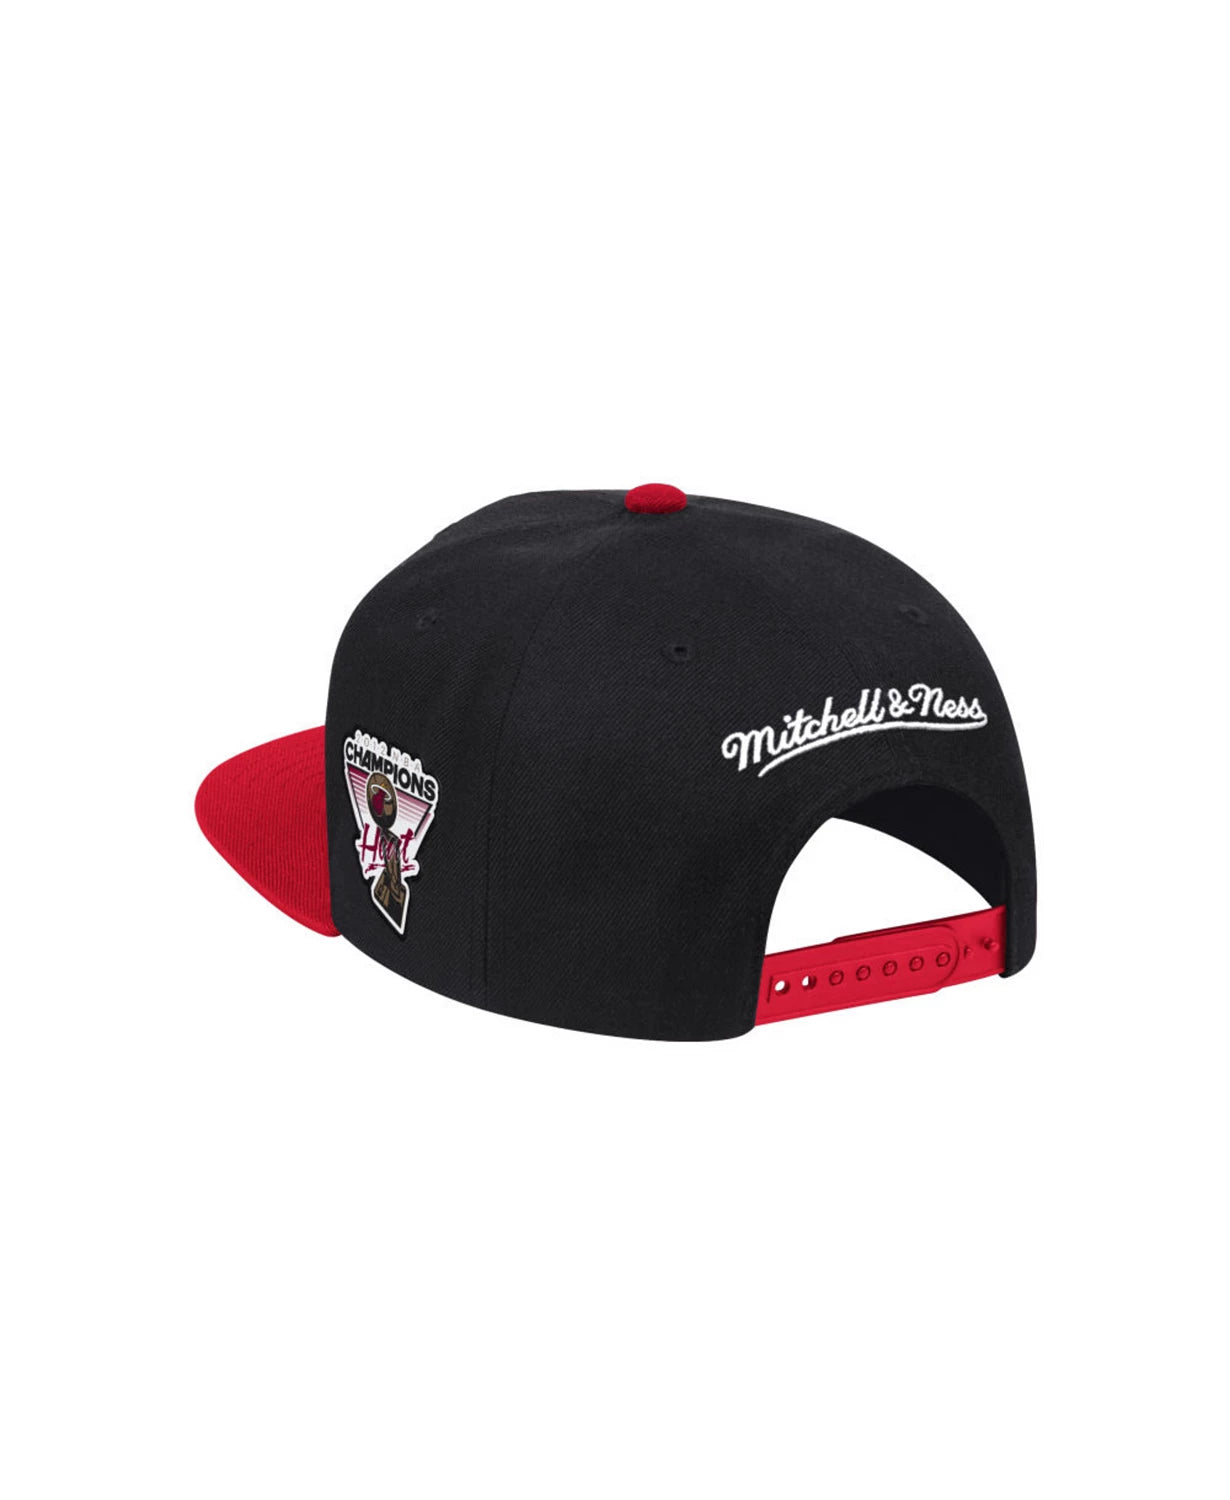 Men's Miami Heat Mitchell & Ness Black/Red NBA Patches 2 Tone Snapback Adjustable Hat